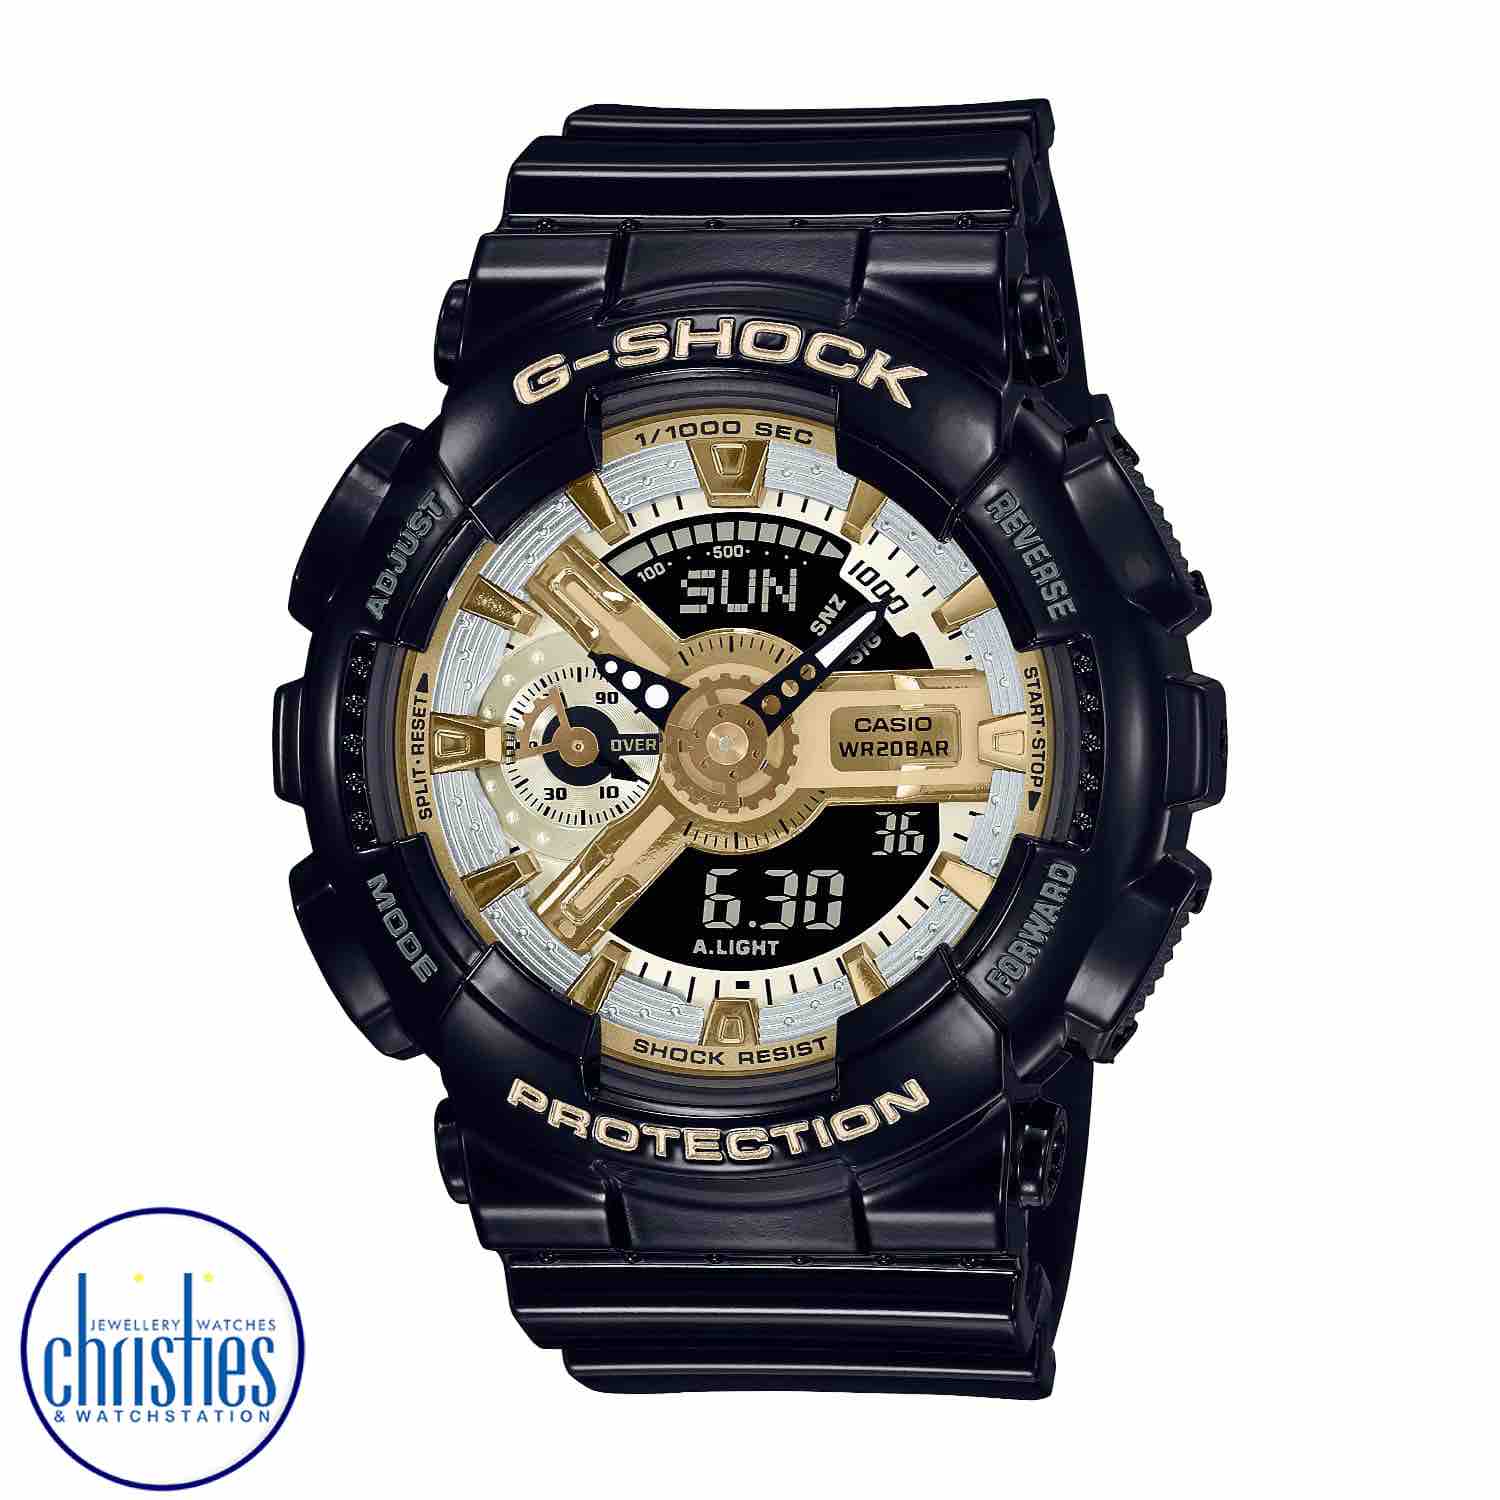 GMAS110GB-1A G-SHOCK Womens Black Gold Watch. Enjoy the iconic oversized GA-110 with a watch face designed for depth and dimension and numerous fine components, all in a timepiece with a smaller profile.